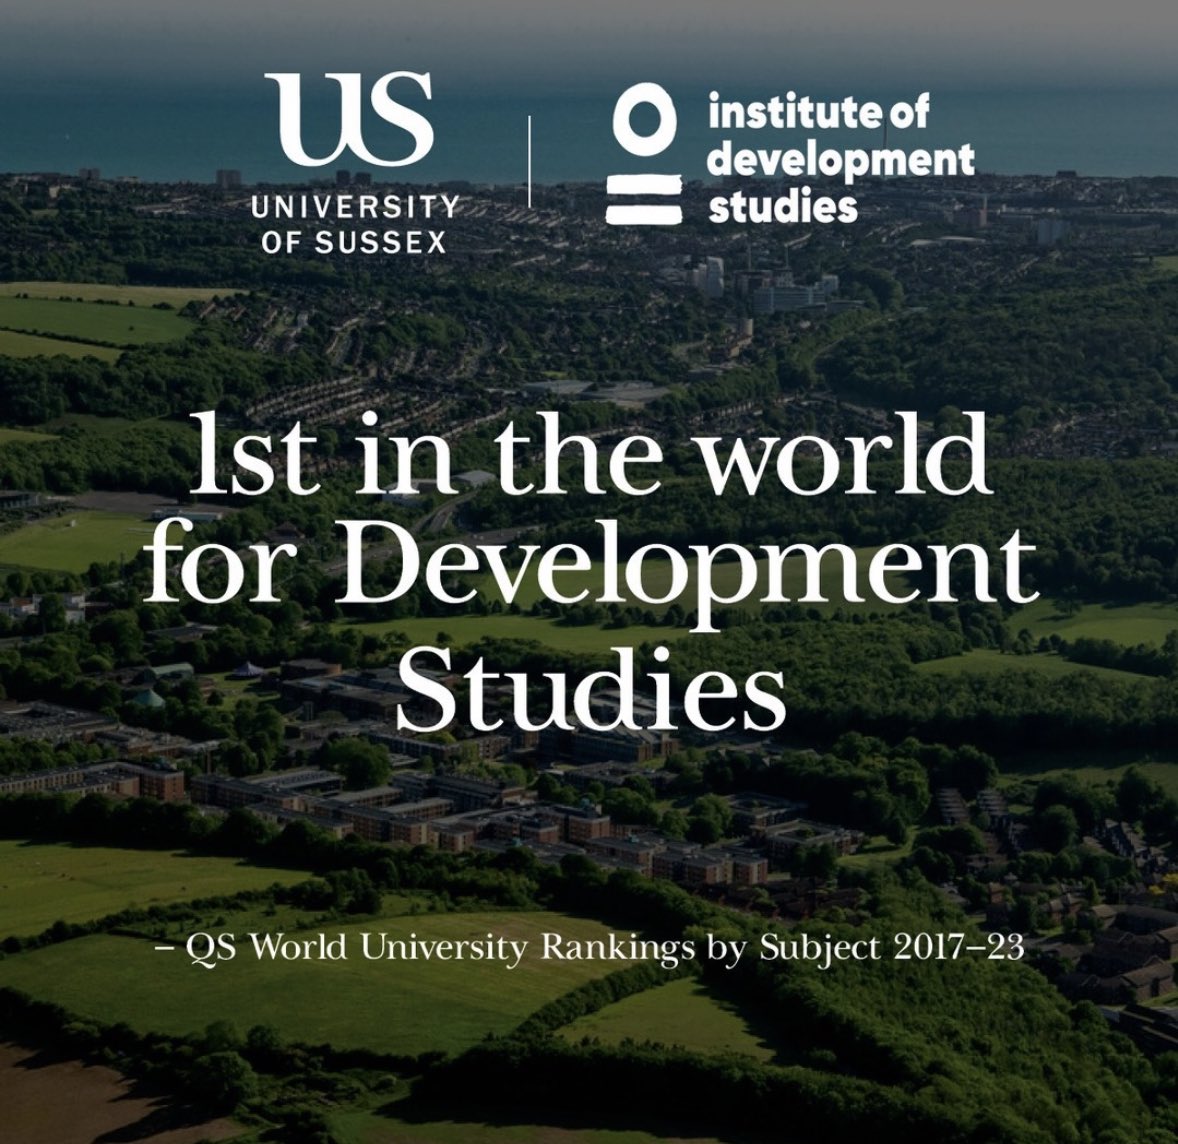 Super happy to share that my alma matter @SussexUni @IDS_UK has been ranked #1 in Development Studies for the 7th year in a row!!🥳 #QSrankings #ProudAlumni #UniversityRankings